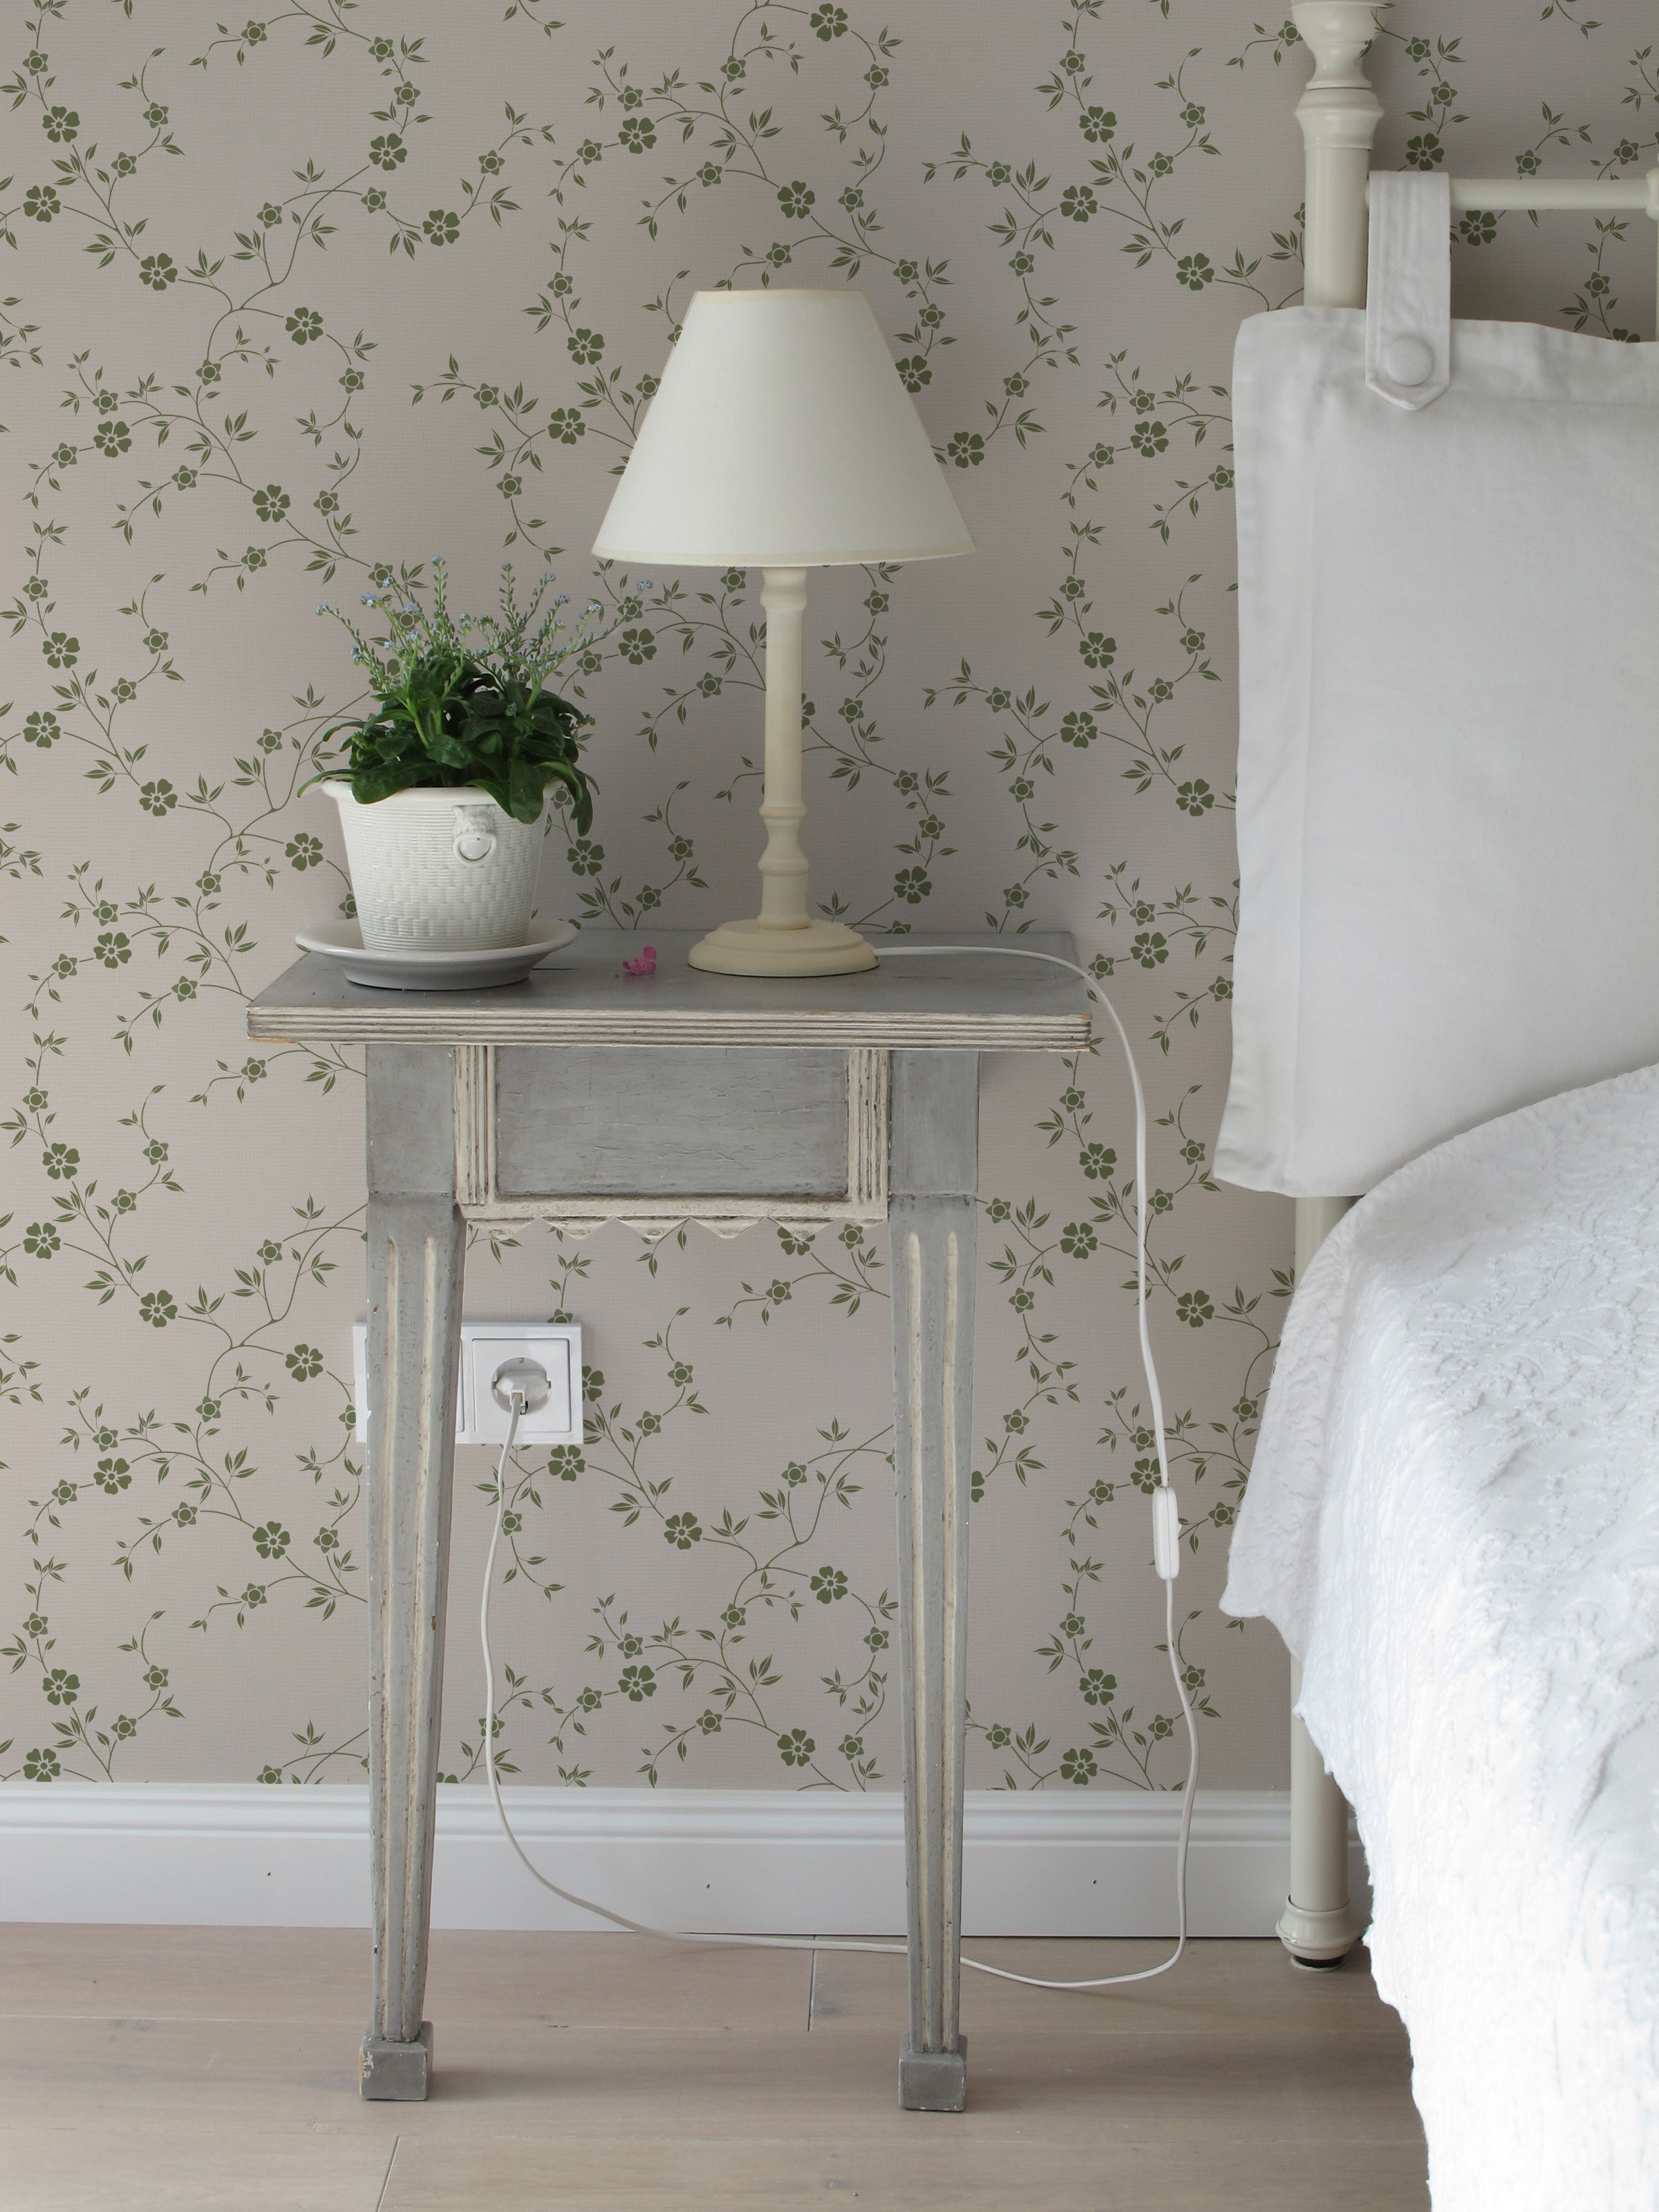 A cozy bedroom corner where the Charming Floral Wallpaper-Moss creates a relaxing ambiance. A distressed wooden side table holds a classic lamp and a potted green plant, complementing the natural theme alongside a comfortable bed with plush white bedding.